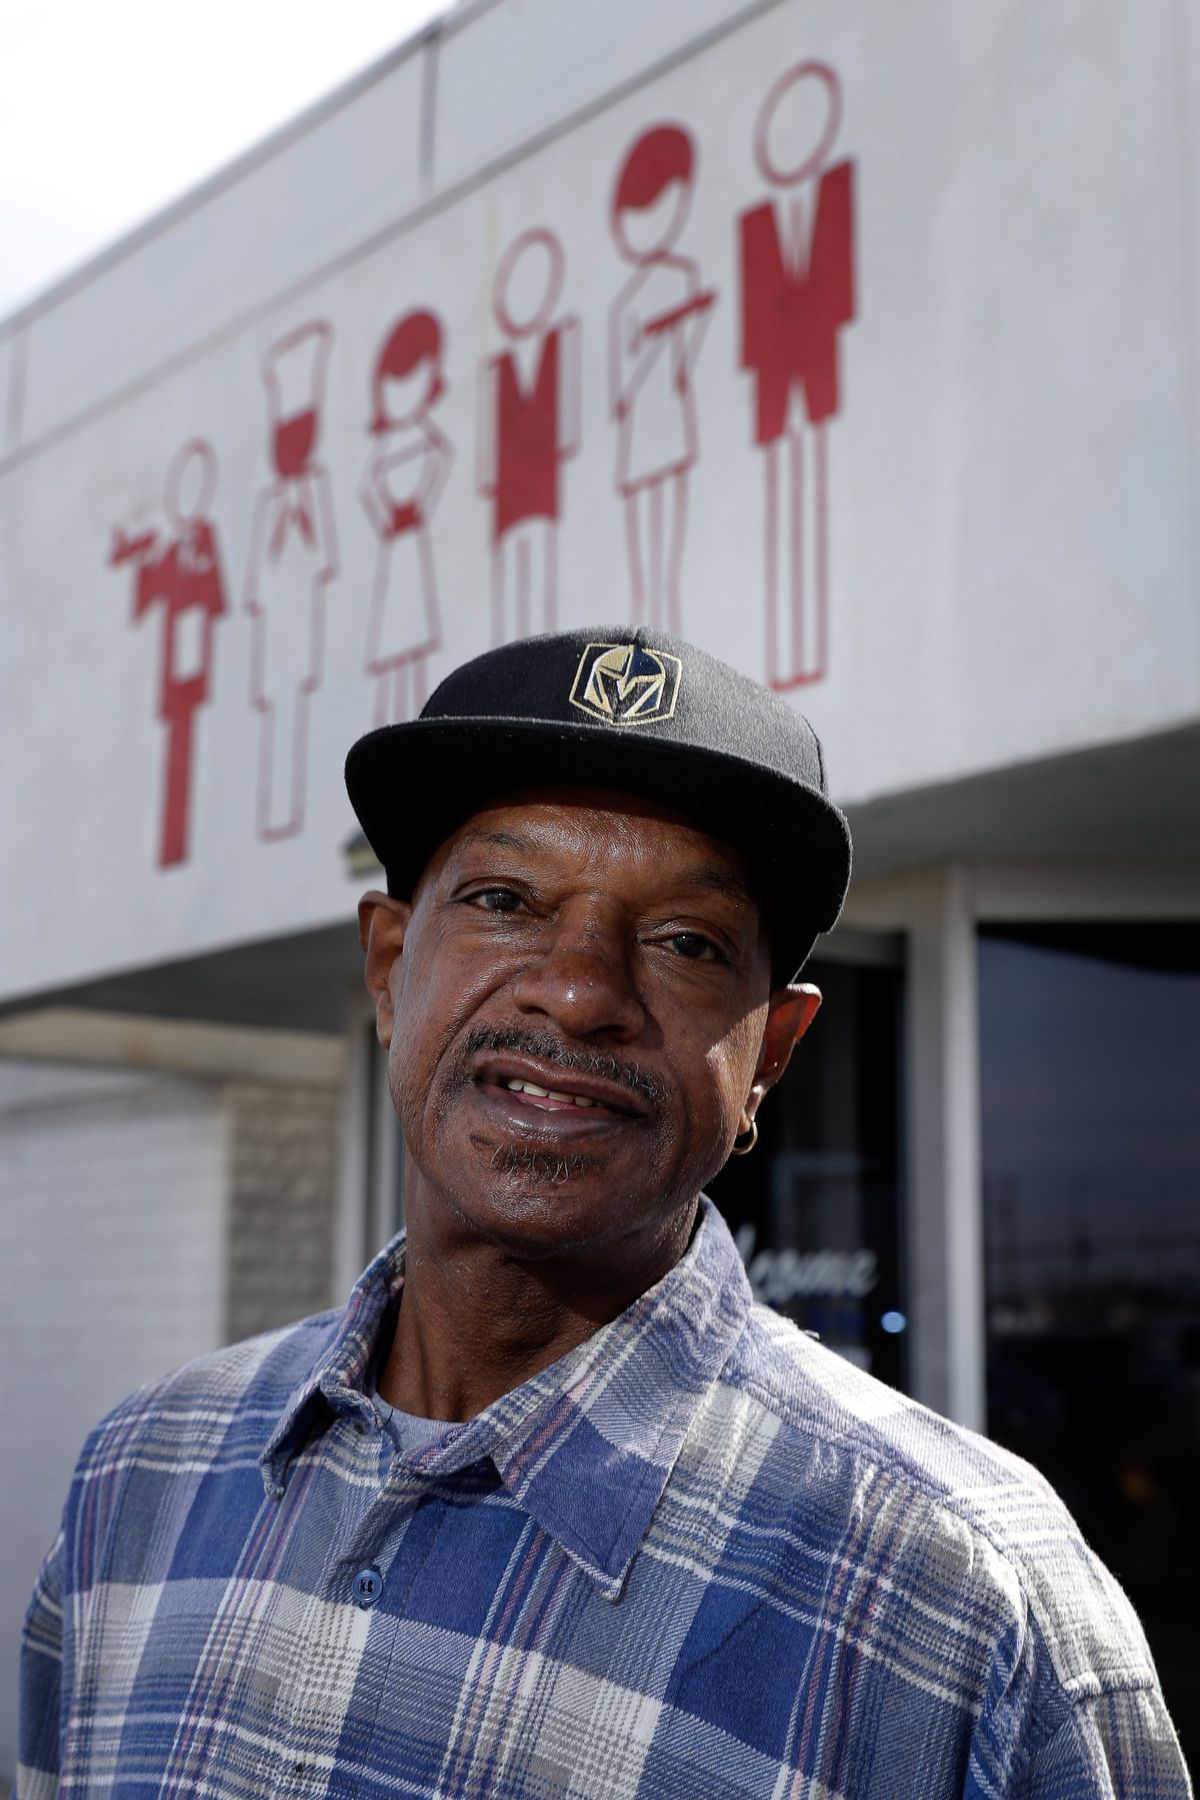 A man in a black cap and checked shirt poses outside the Culinary Union hall.